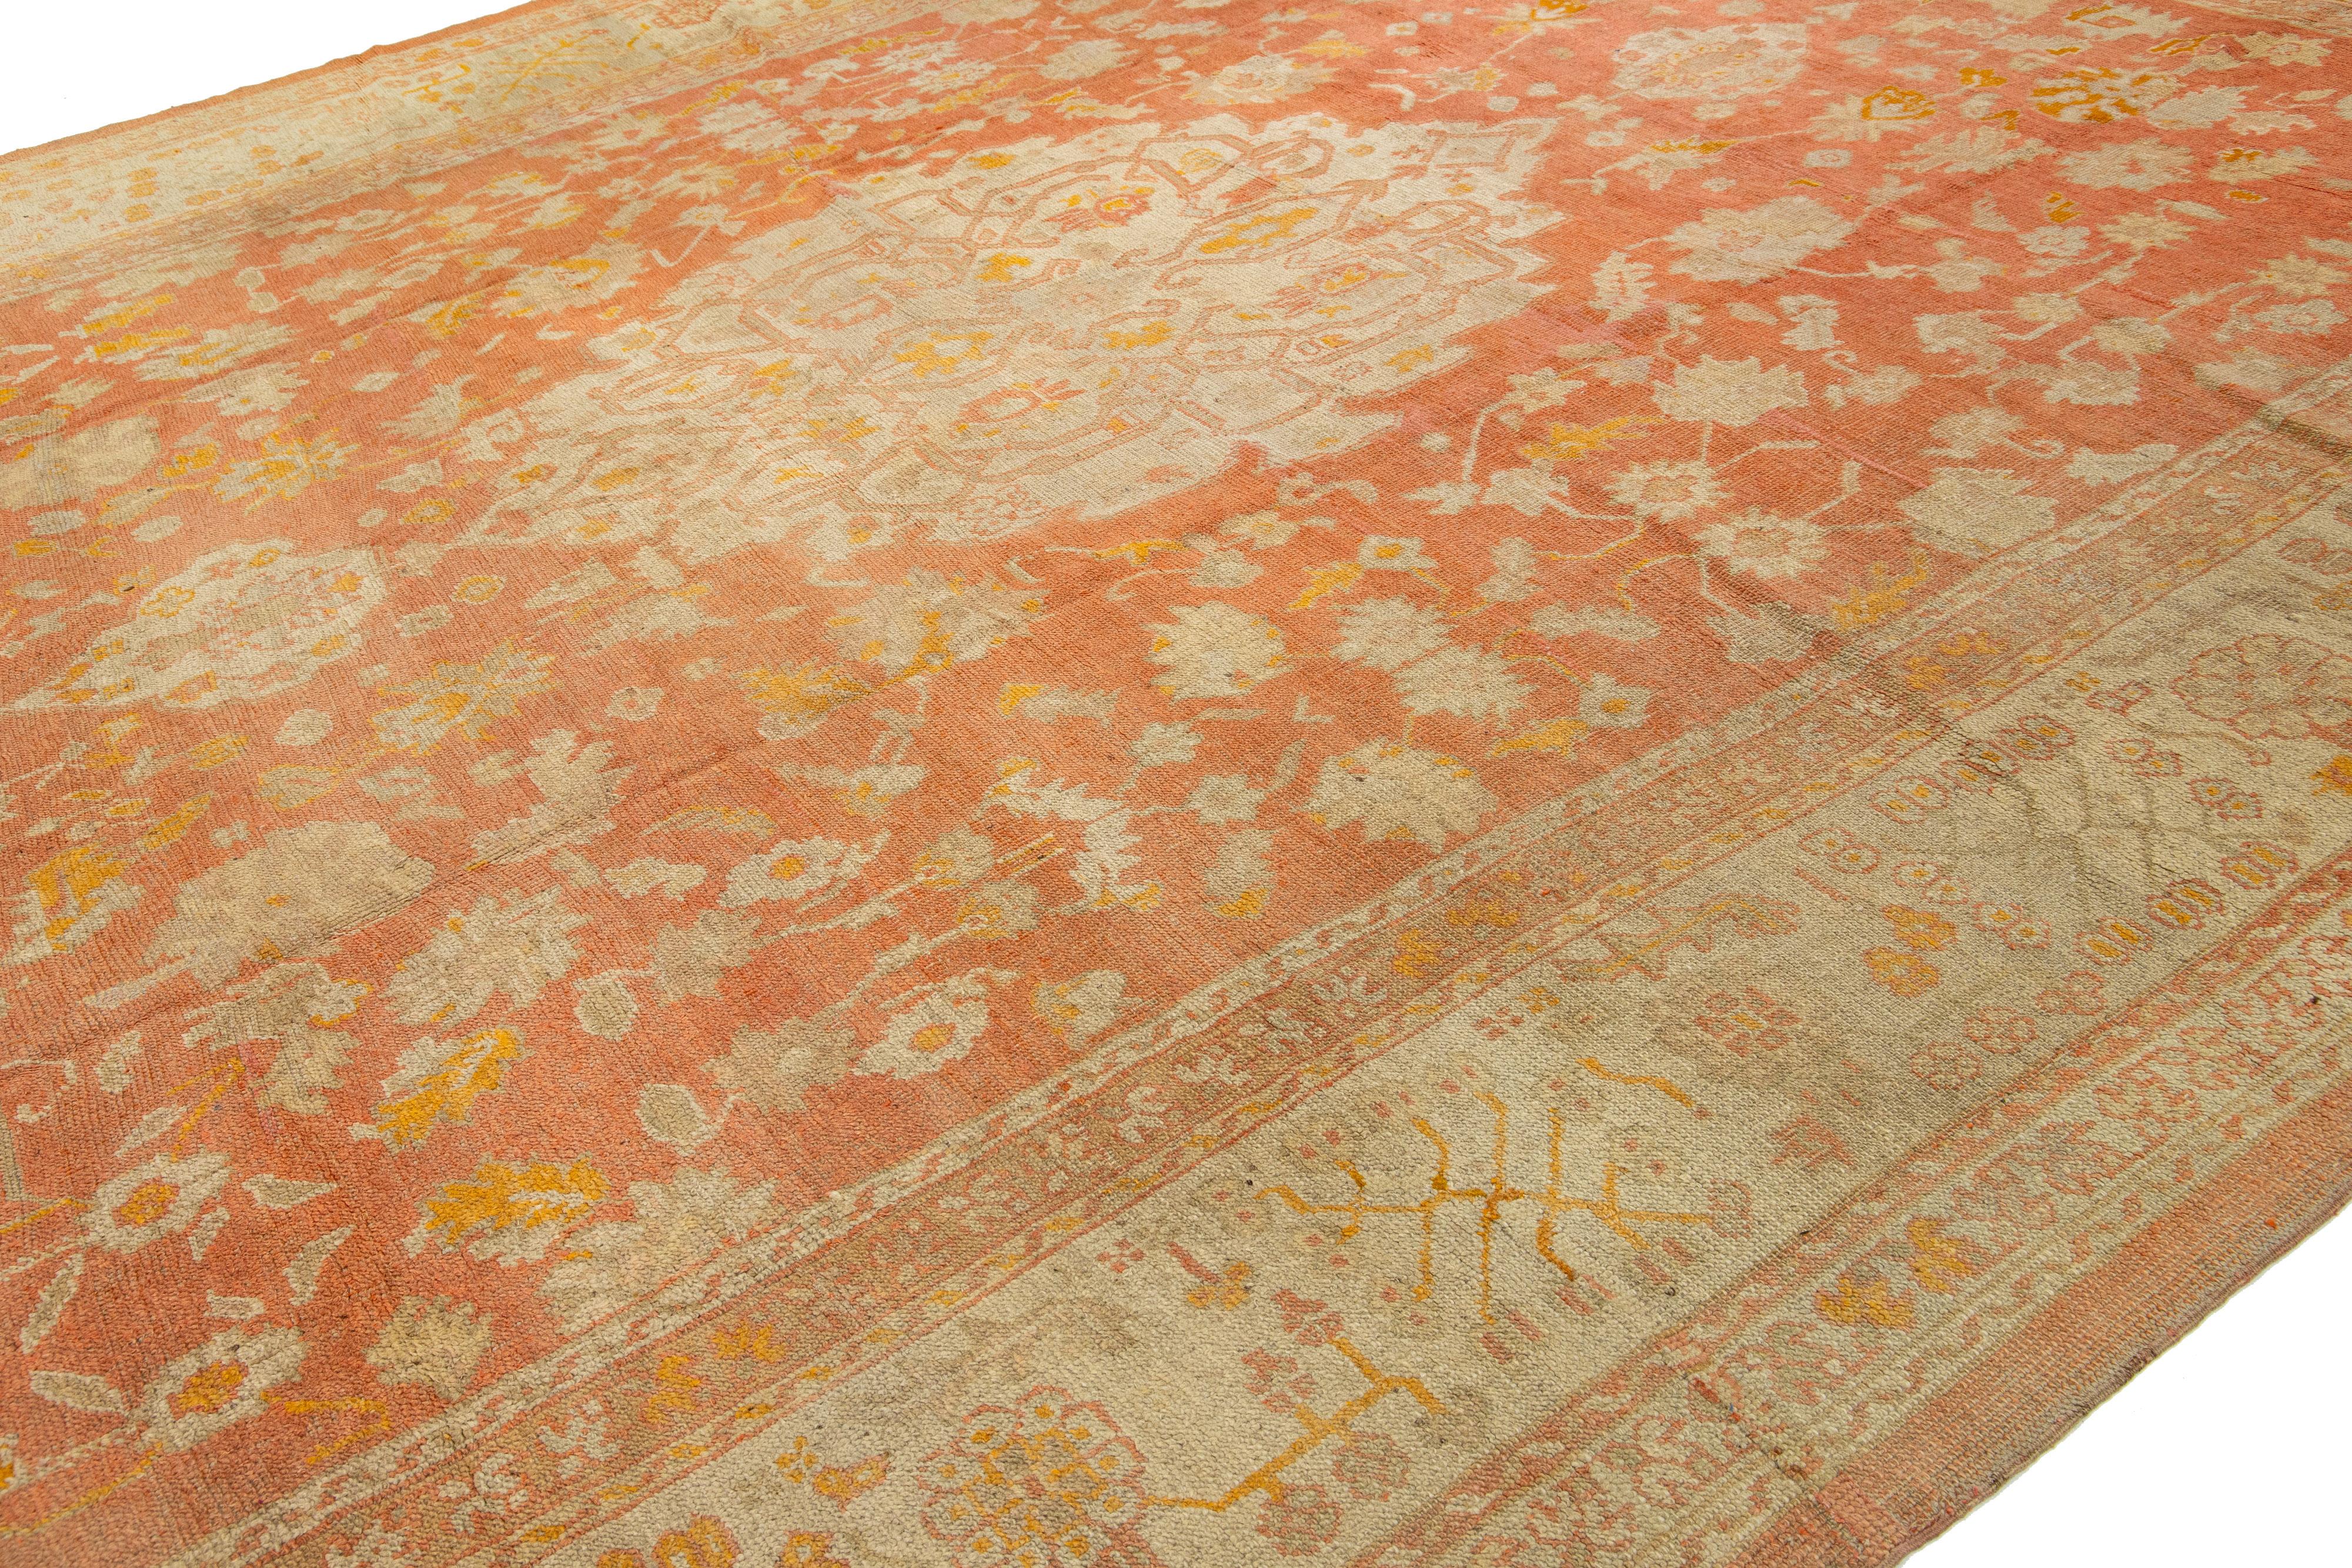 Hand-Knotted 1880's Handmade Orange Turkish Oushak Wool Rug Featuring a Medallion Motif  For Sale